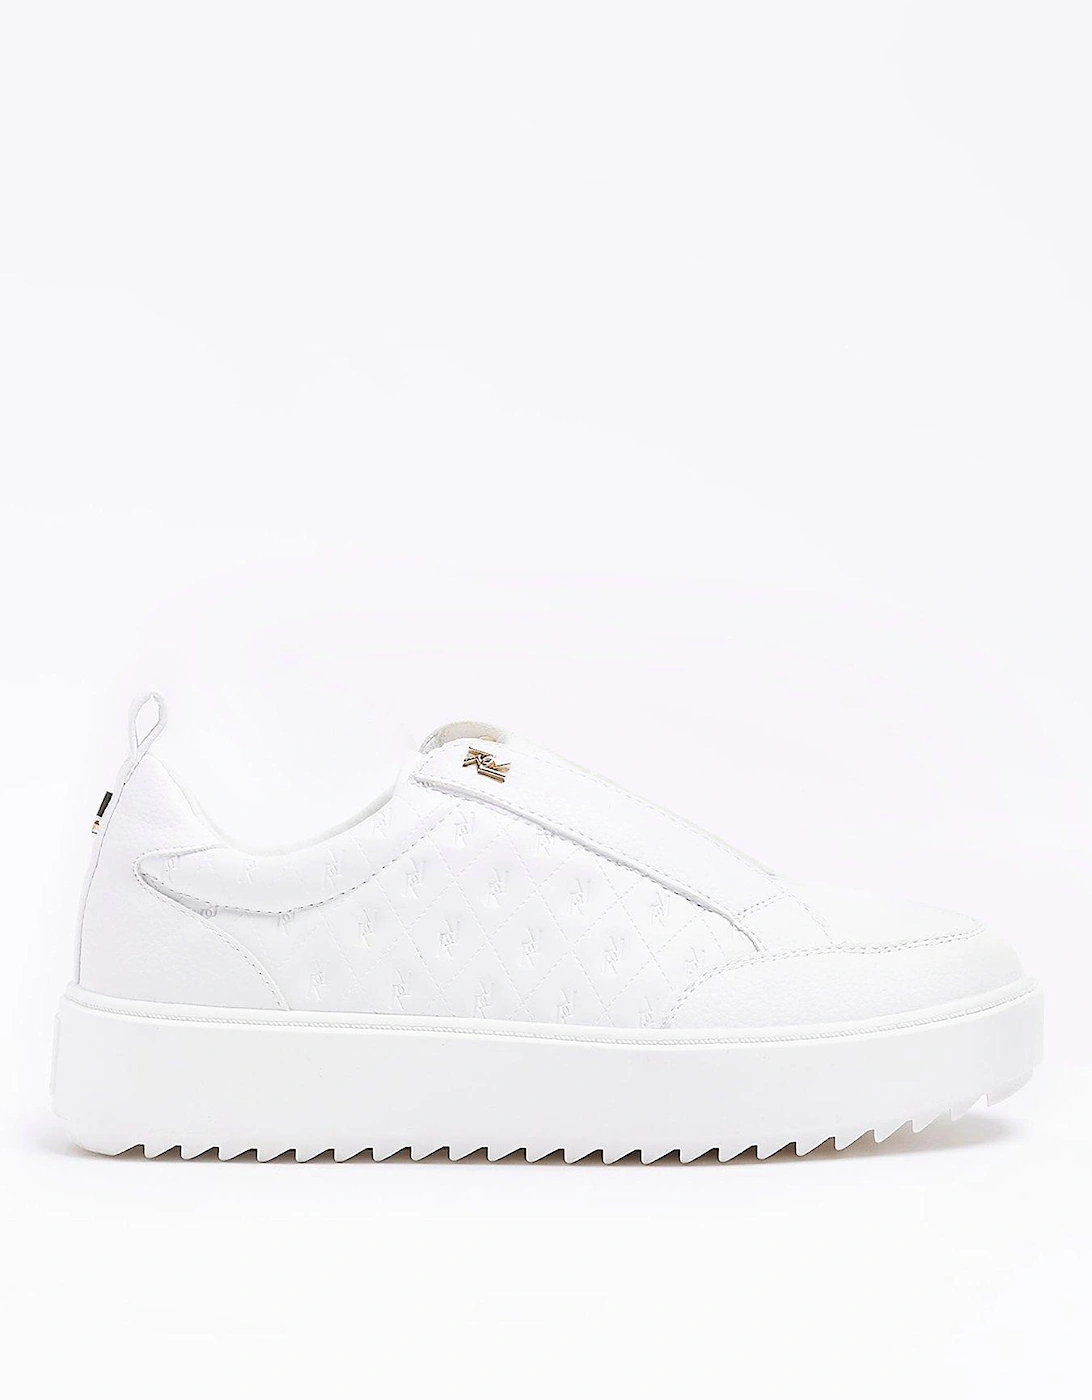 Embossed Plimsole - White, 7 of 6